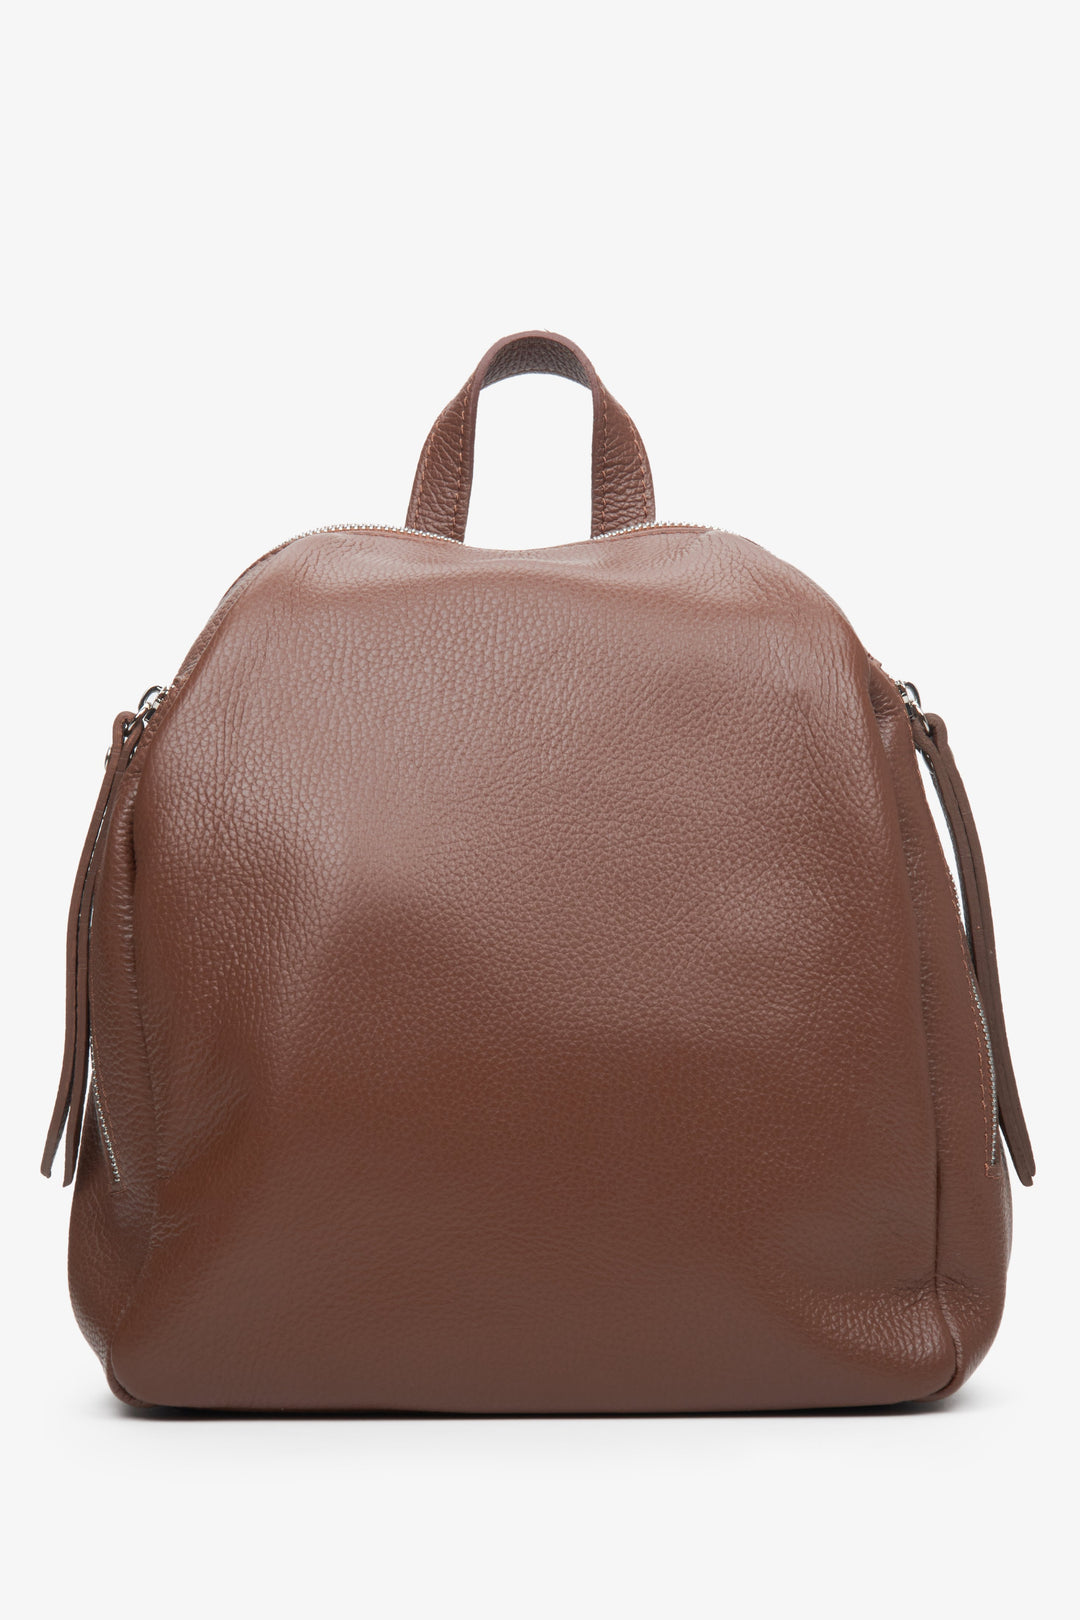 Women's Brown Leather Backpack with Silver Accents Estro ER00113409.